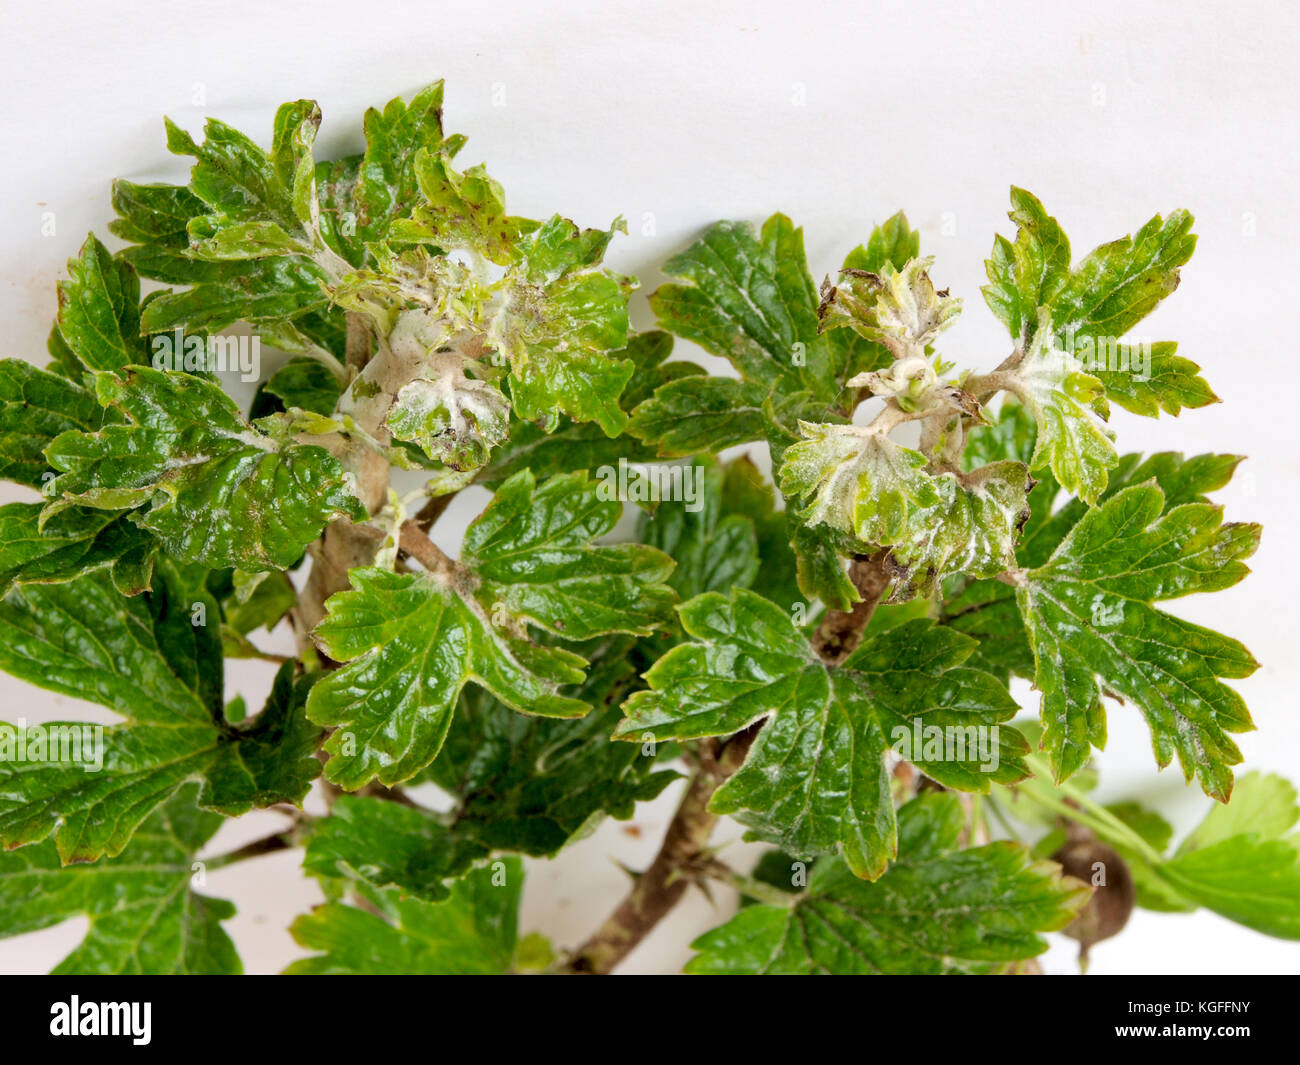 Gooseberries top leaves infected and damaged by fungus disease powdery mildew close up. Stock Photo